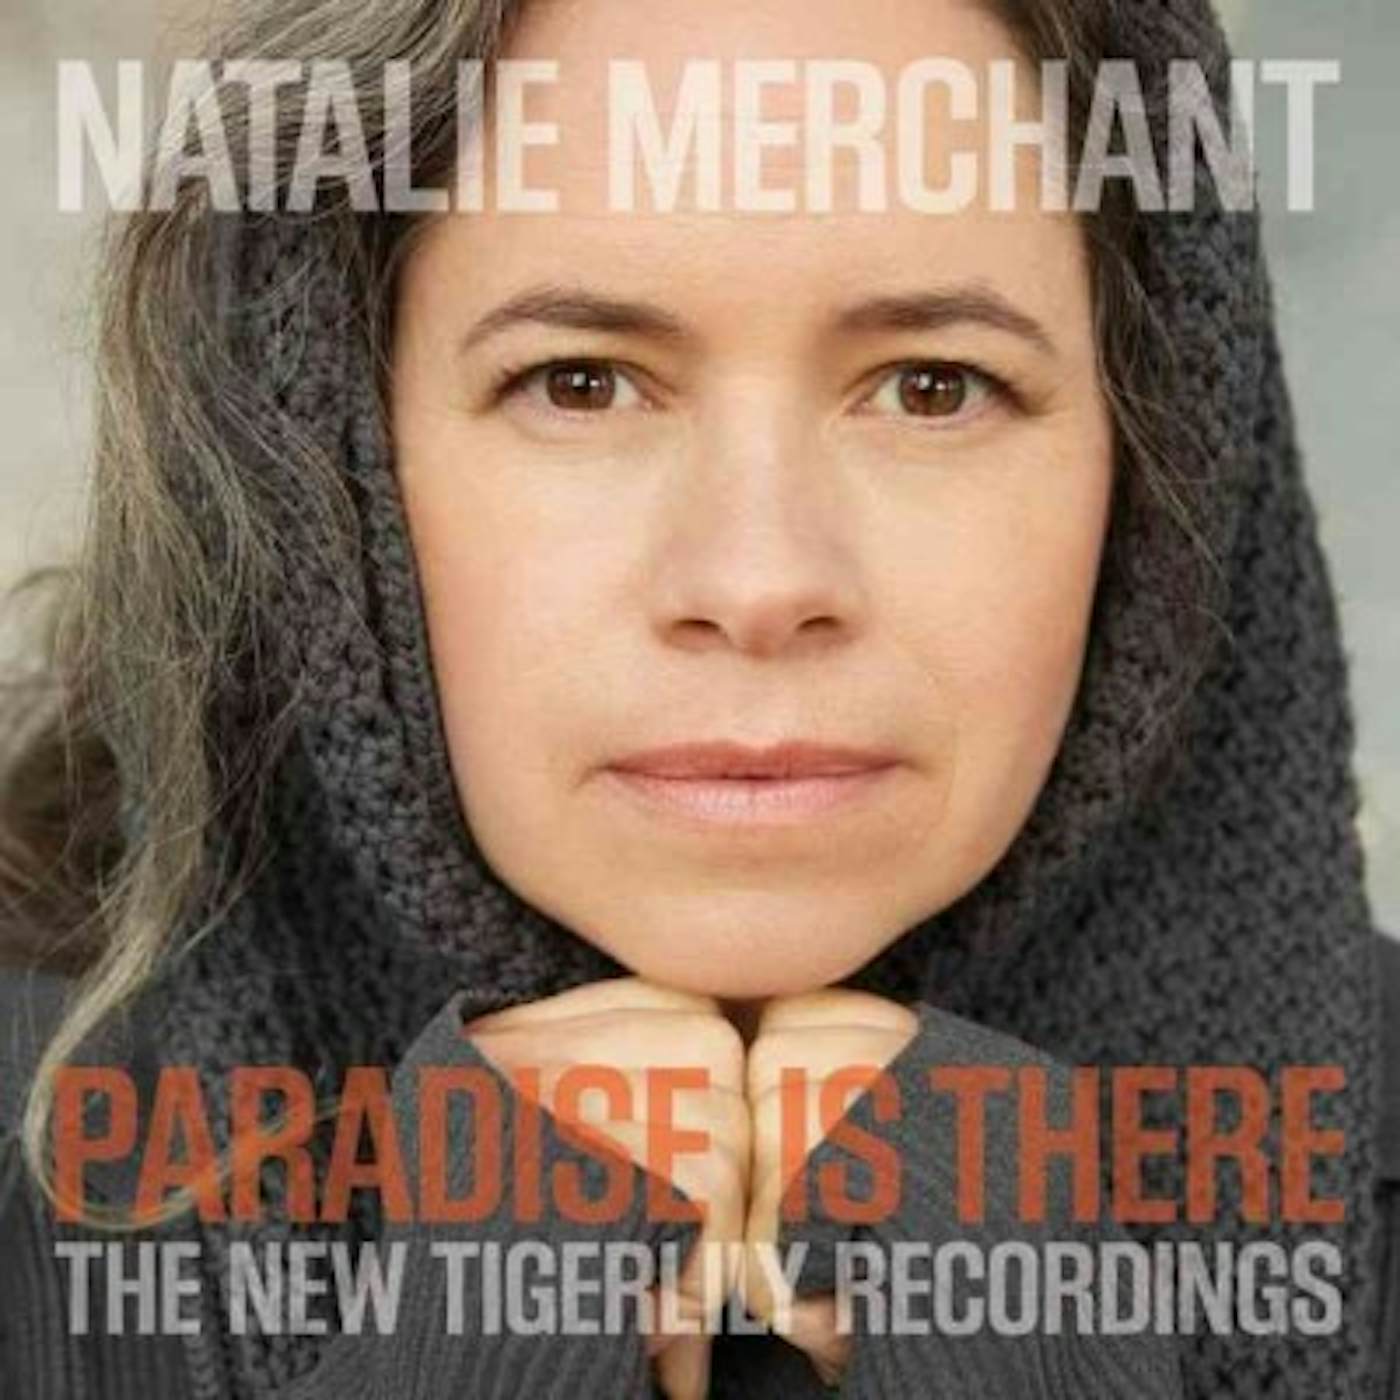 Natalie Merchant Paradise Is There: The New Tigerlily Recordings Vinyl Record